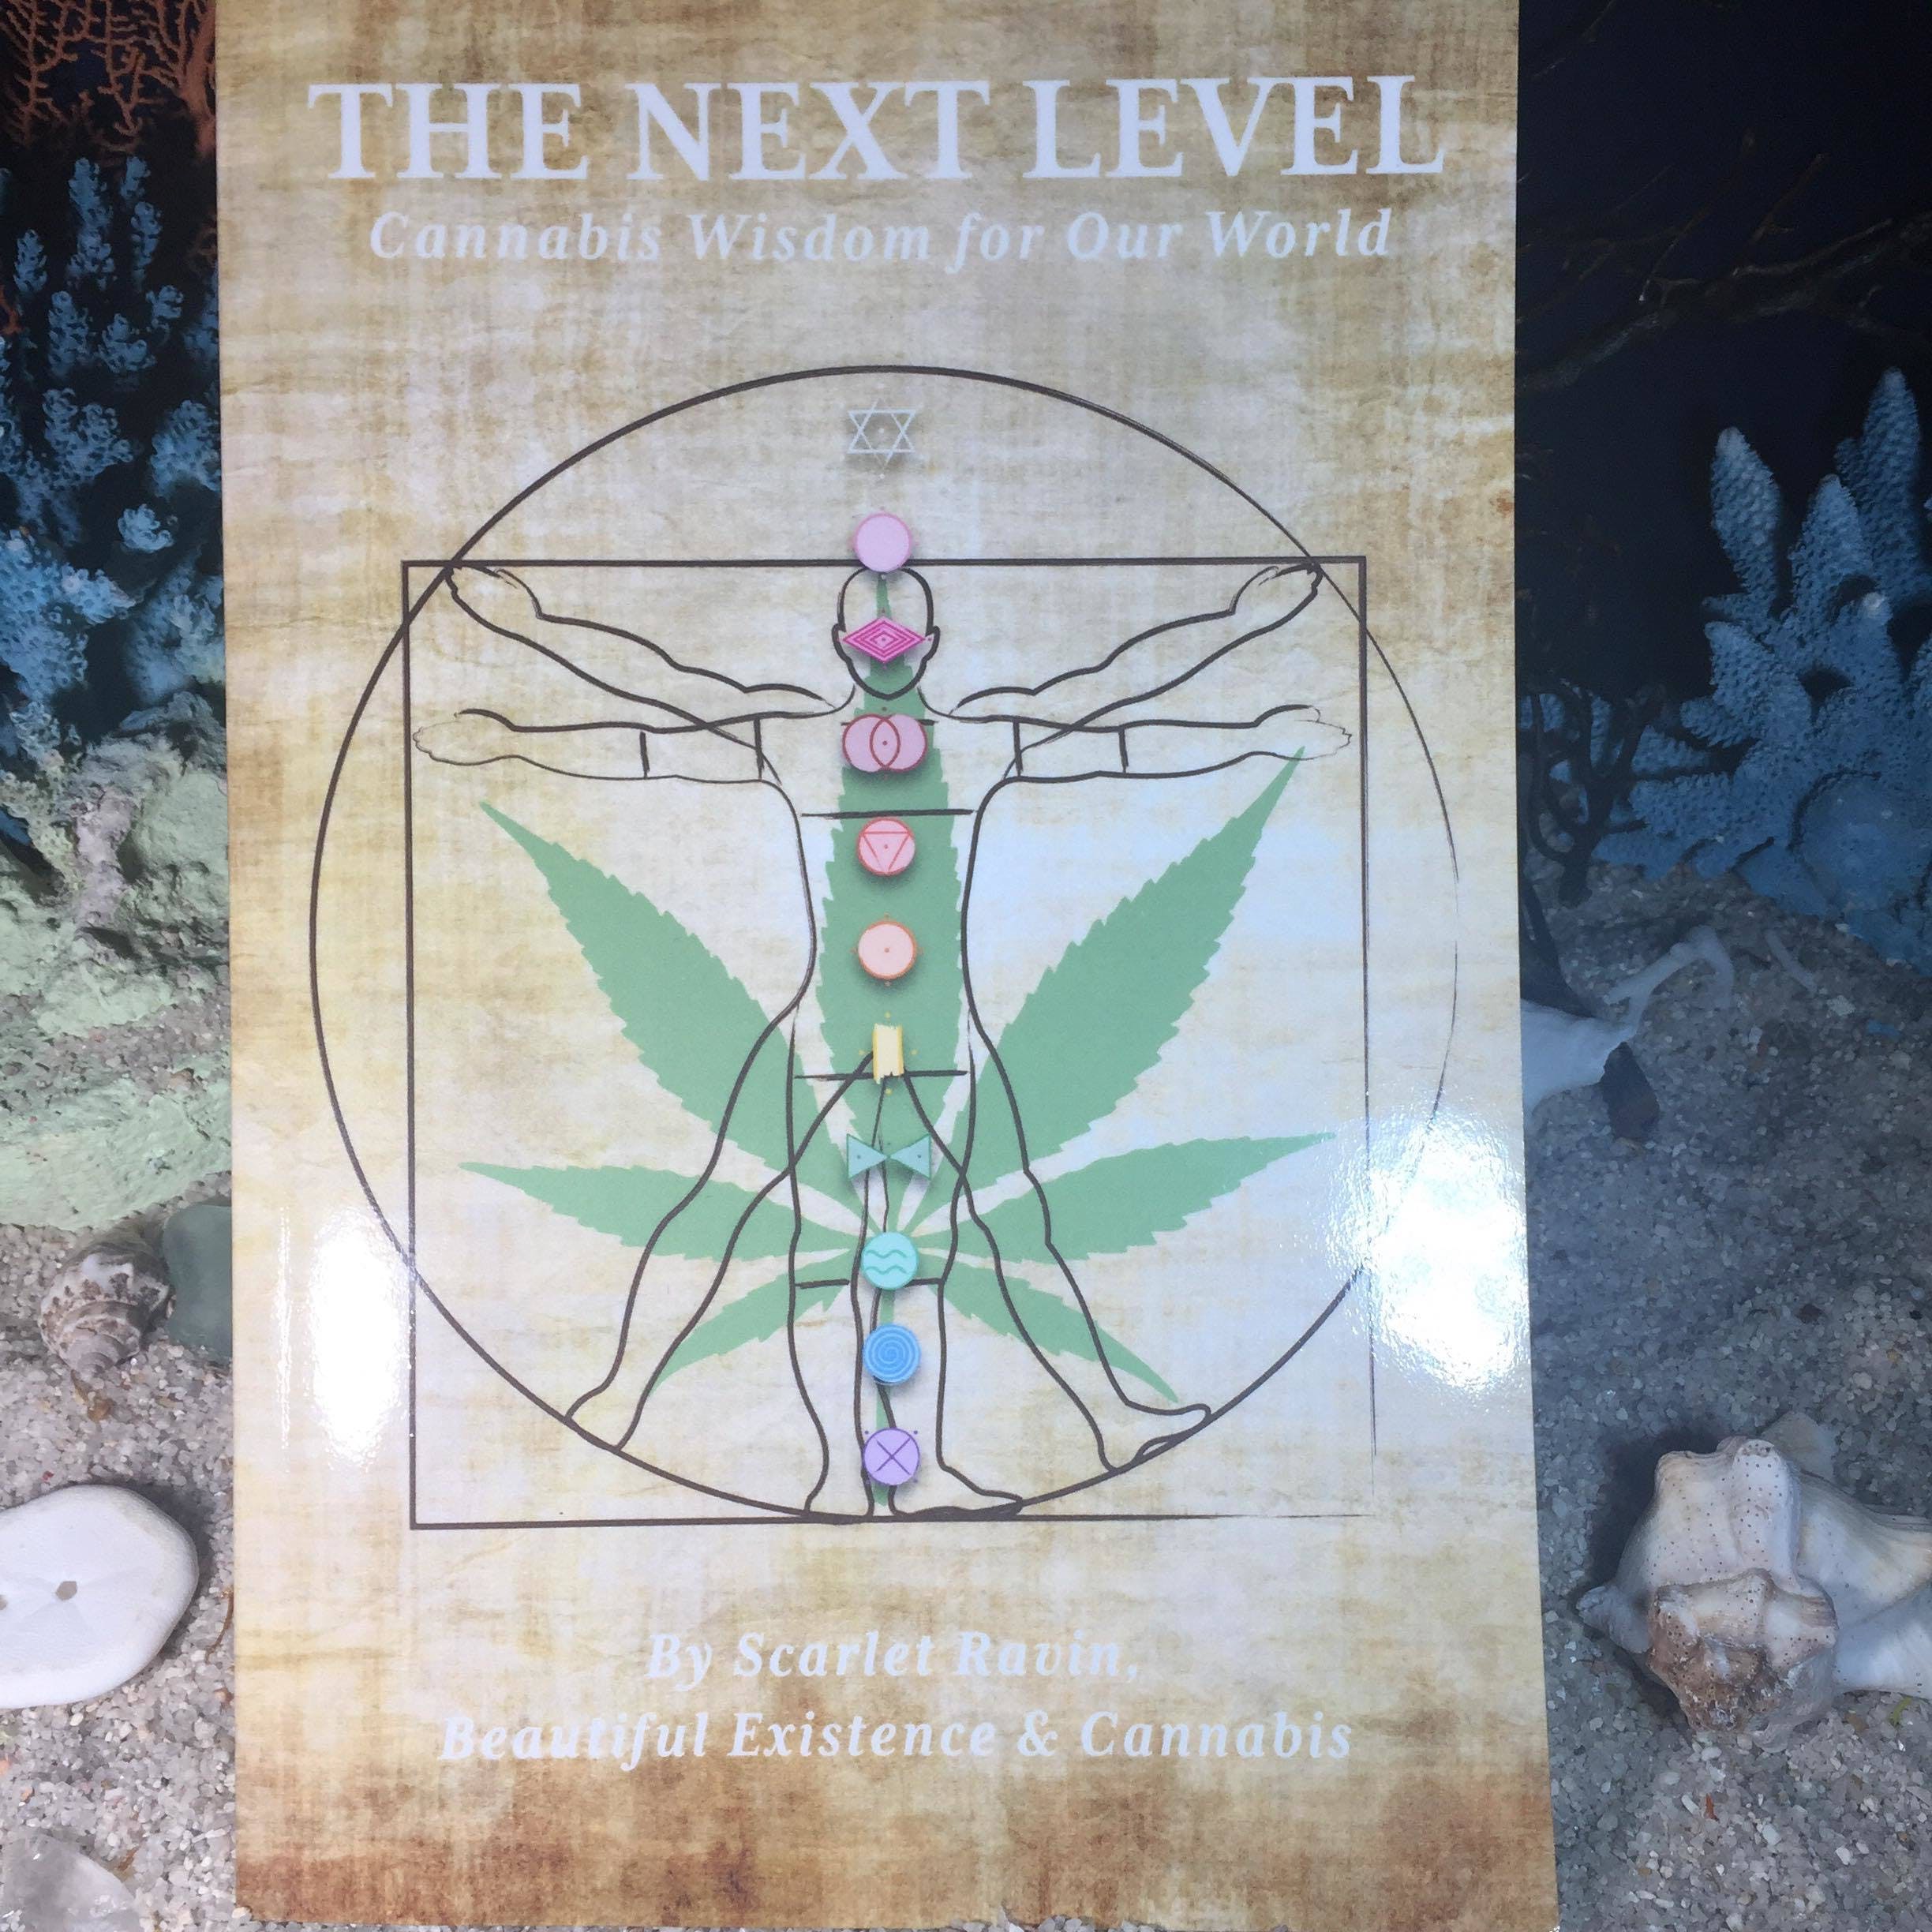 The Next Level: Cannabis Wisdom for Our World